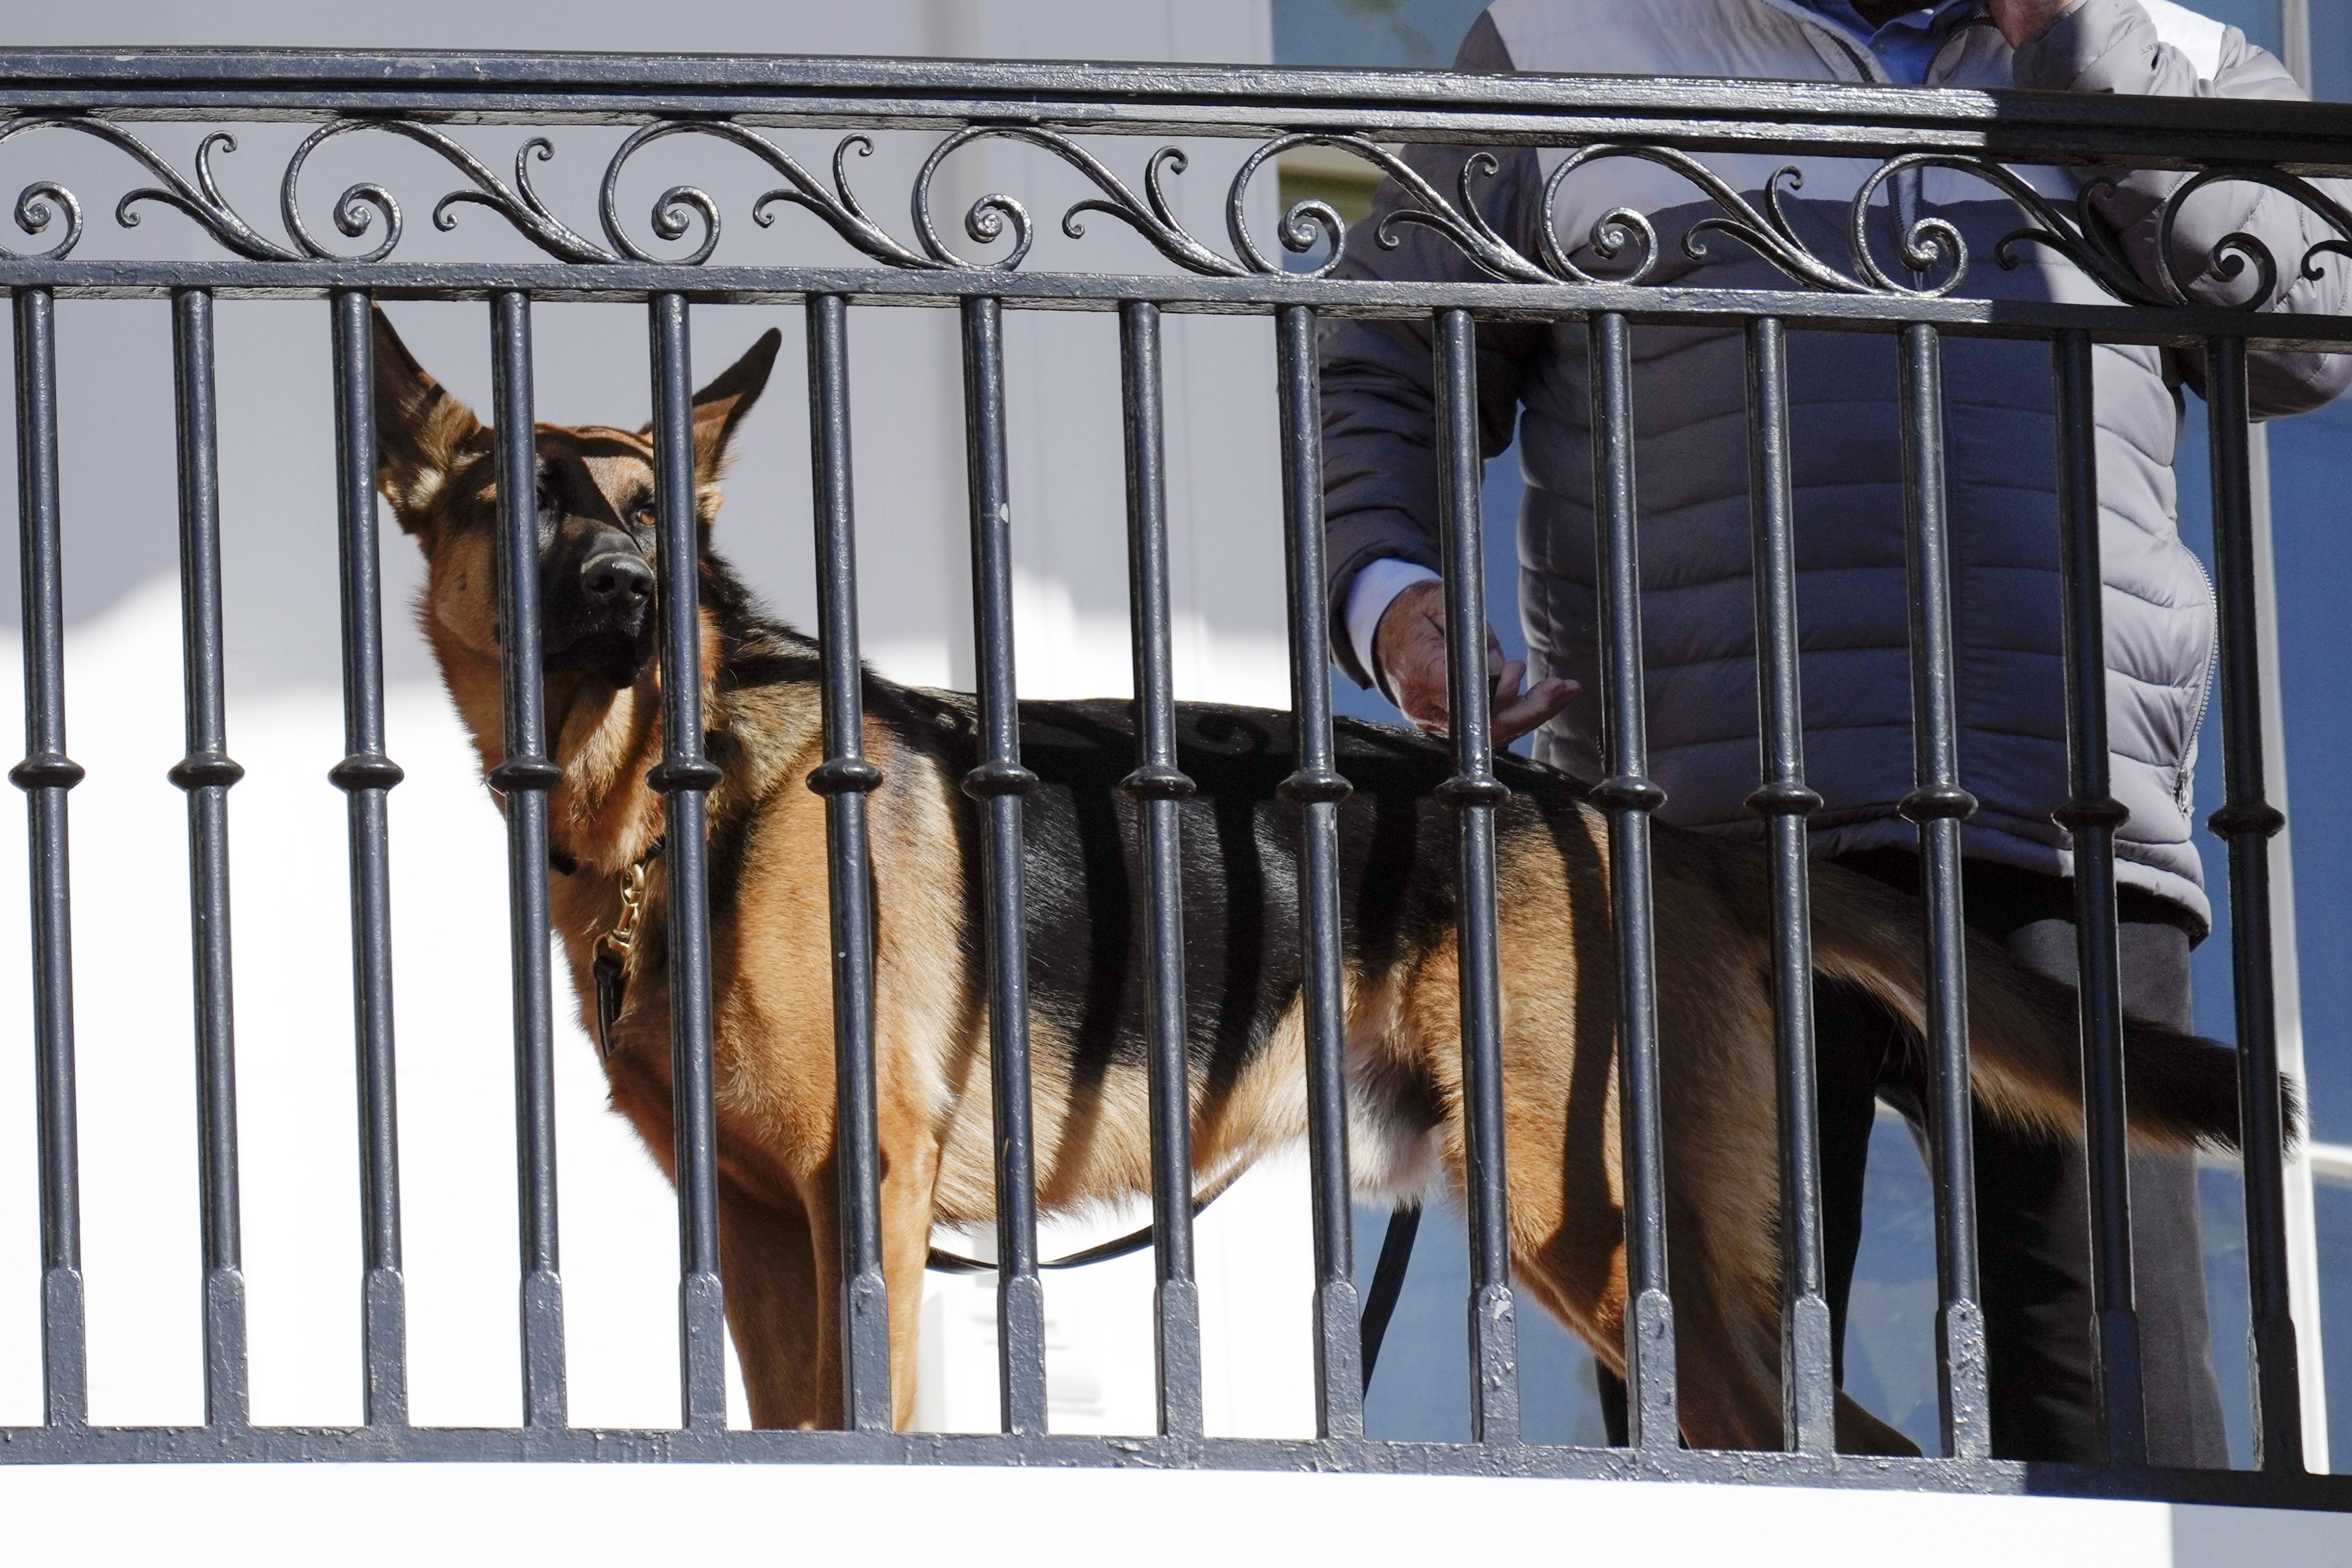 US President Joe Biden’s dog Commander looks out from the balcony during an event at the White House in November 2022. Photo: AP